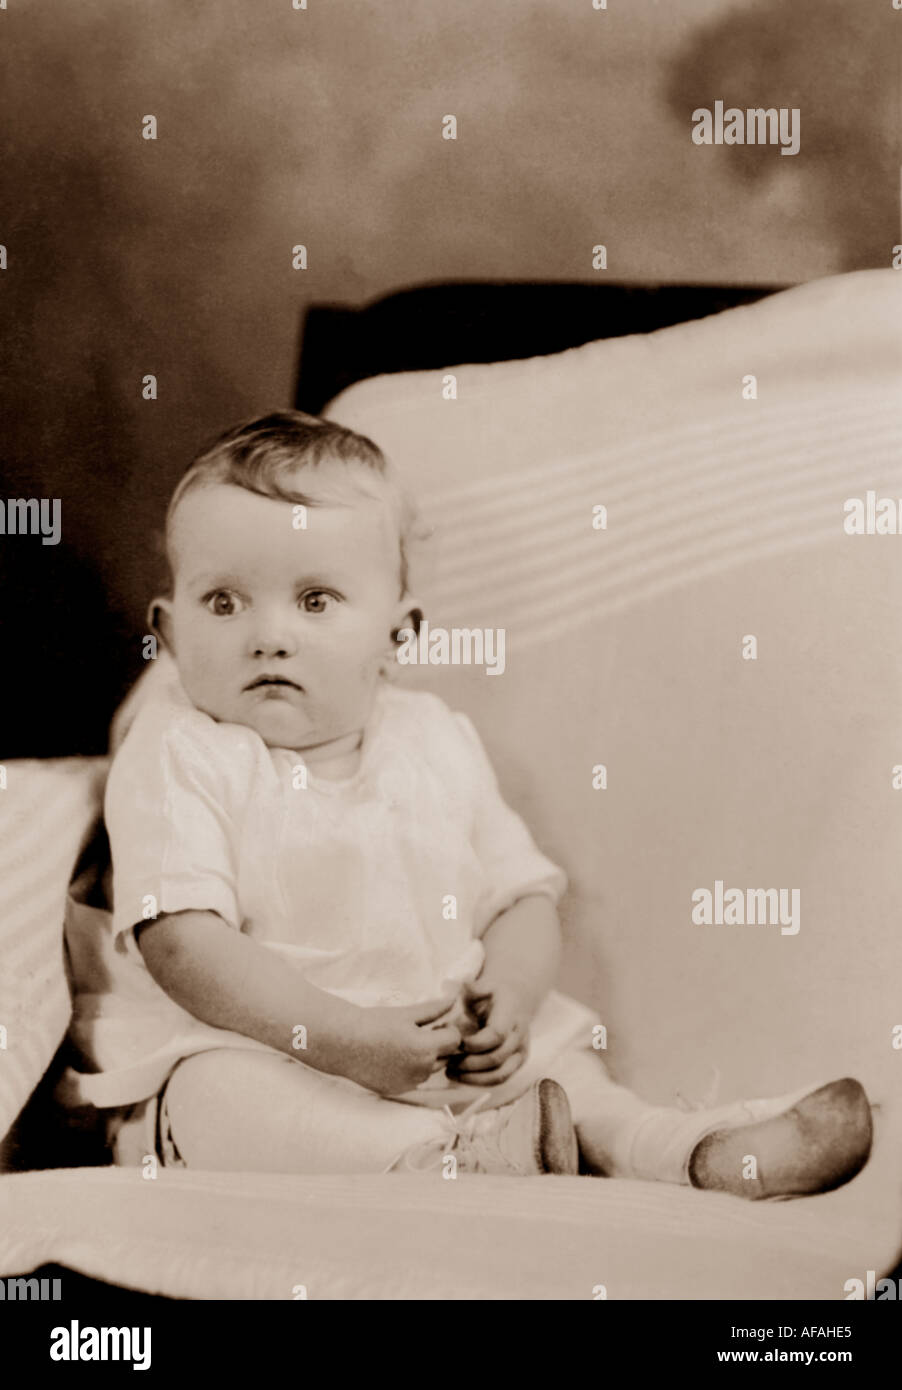 Early 1900's photograph of baby making a funny face, U.K. Stock Photo